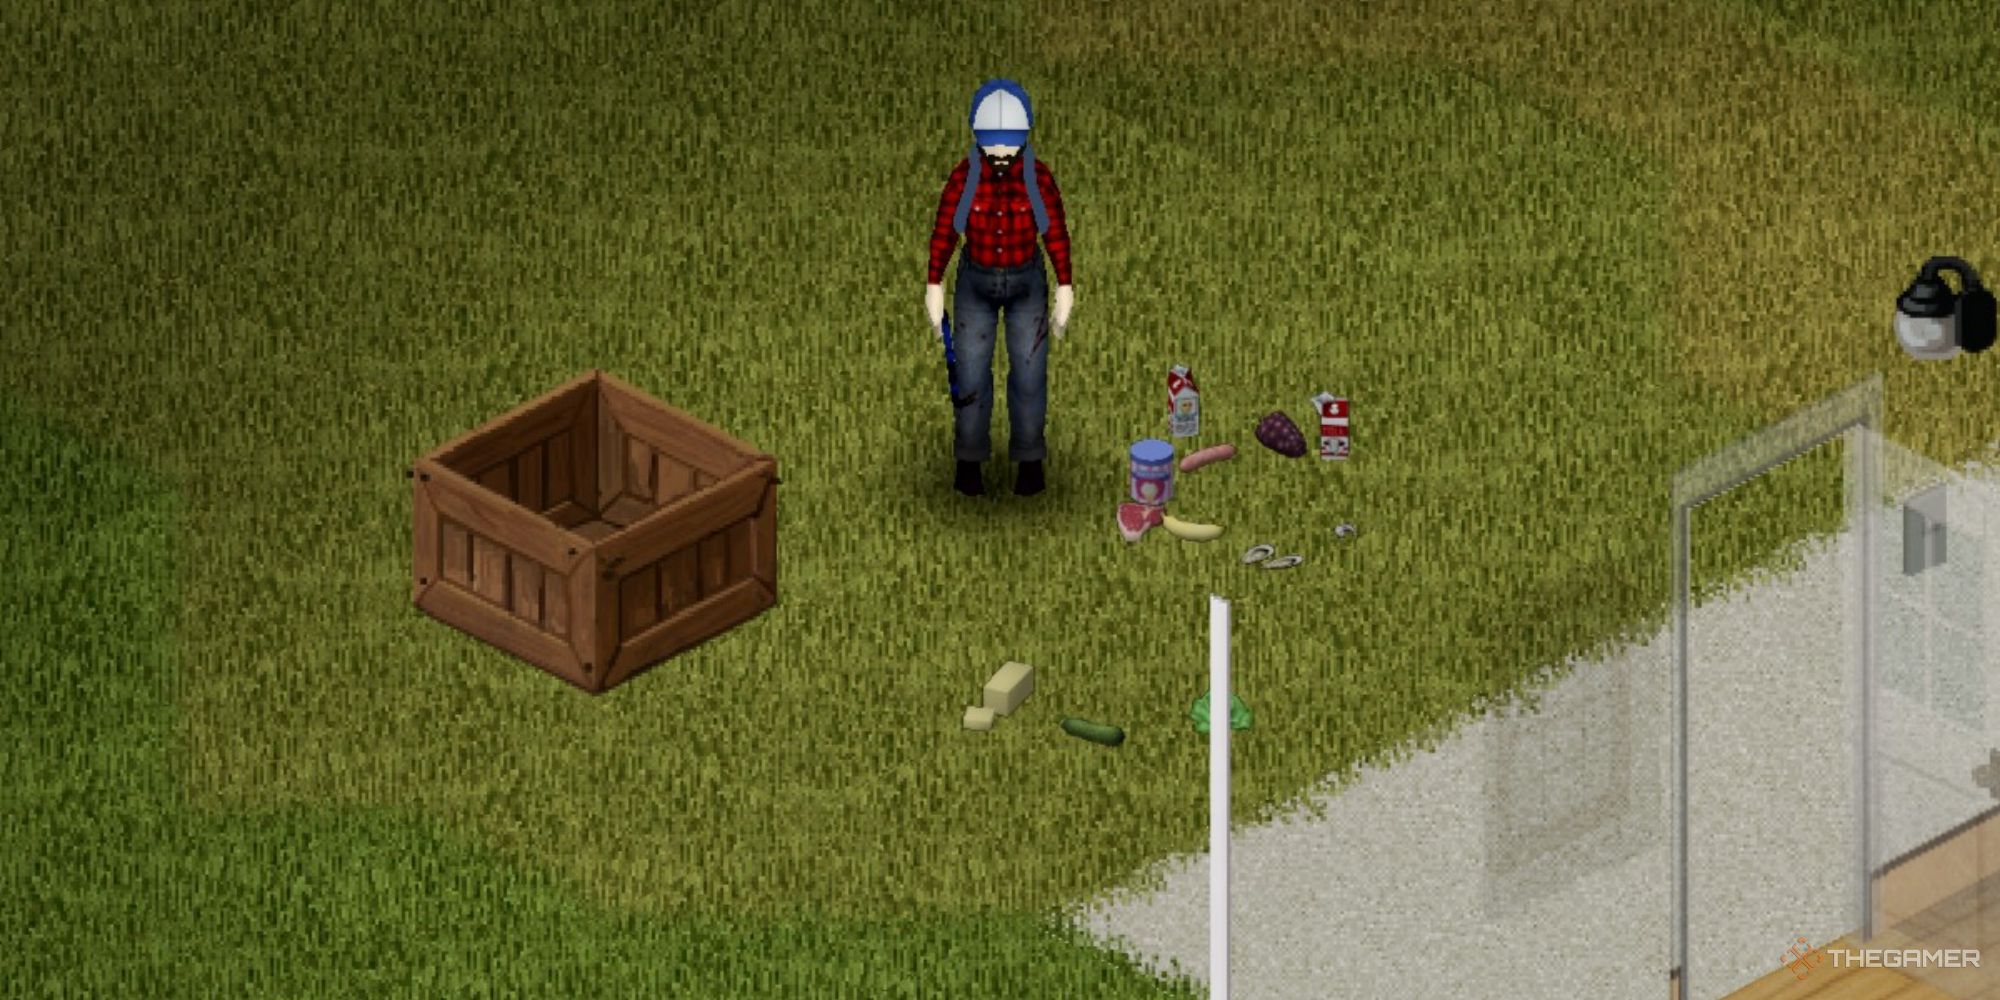 A screenshot from Project Zomboid showing a compost bin with different foods next to it like butter, milk, ice cream, sausage, other meats, and more. There's also a player in jeans and a red plaid shirt.